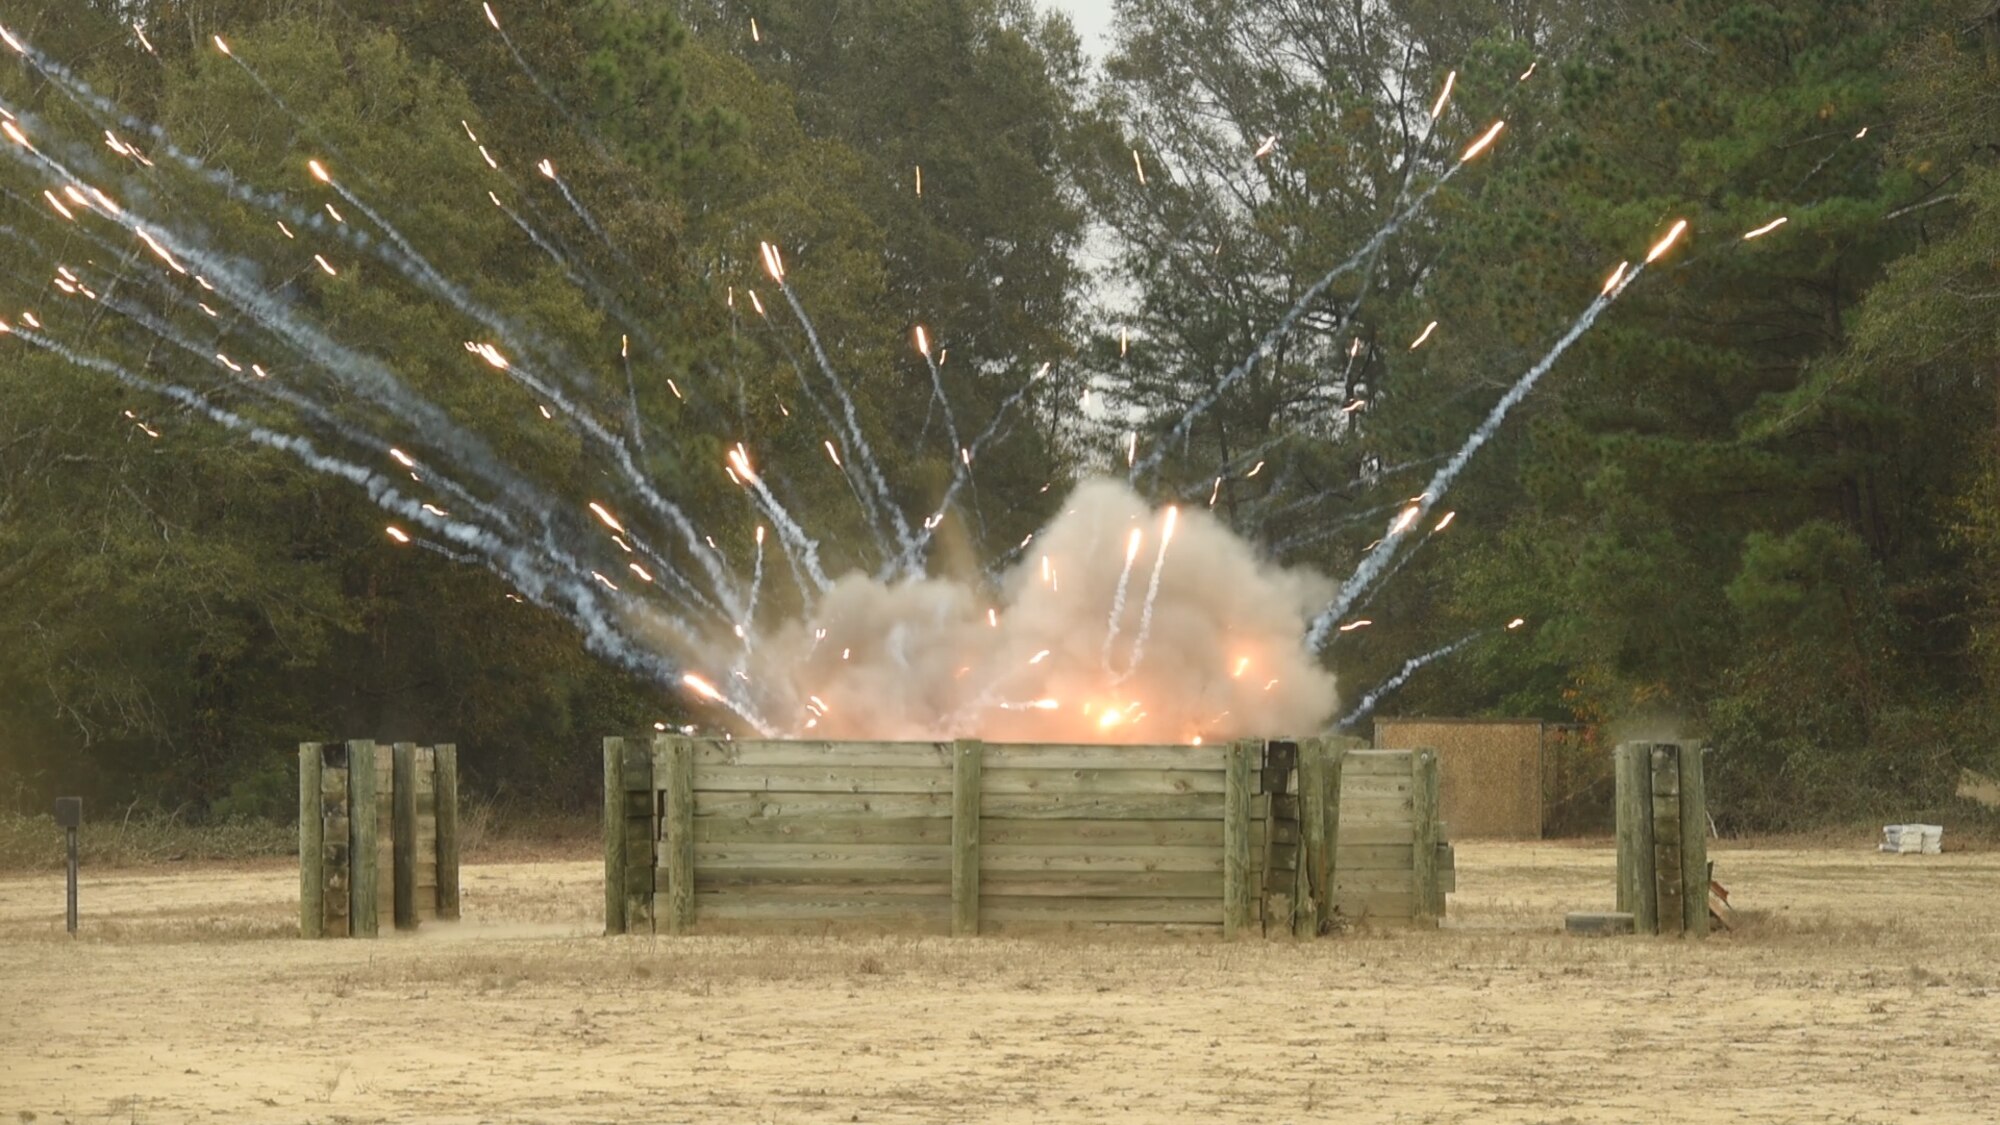 A hung flare from an F-15E Strike Eagle aircraft was disposed of by members of the 4th Civil Engineer Squadron explosive ordnance disposal team, Nov. 9, 2016, at Seymour Johnson Air Force Base, North Carolina. A flare, when not fully ignited, presents a hazard when not properly handled; EOD safely removes the hazard from the aircraft so it can return to a fully mission- capable status. (U.S. Air Force photo by Airman Shawna L. Keyes)